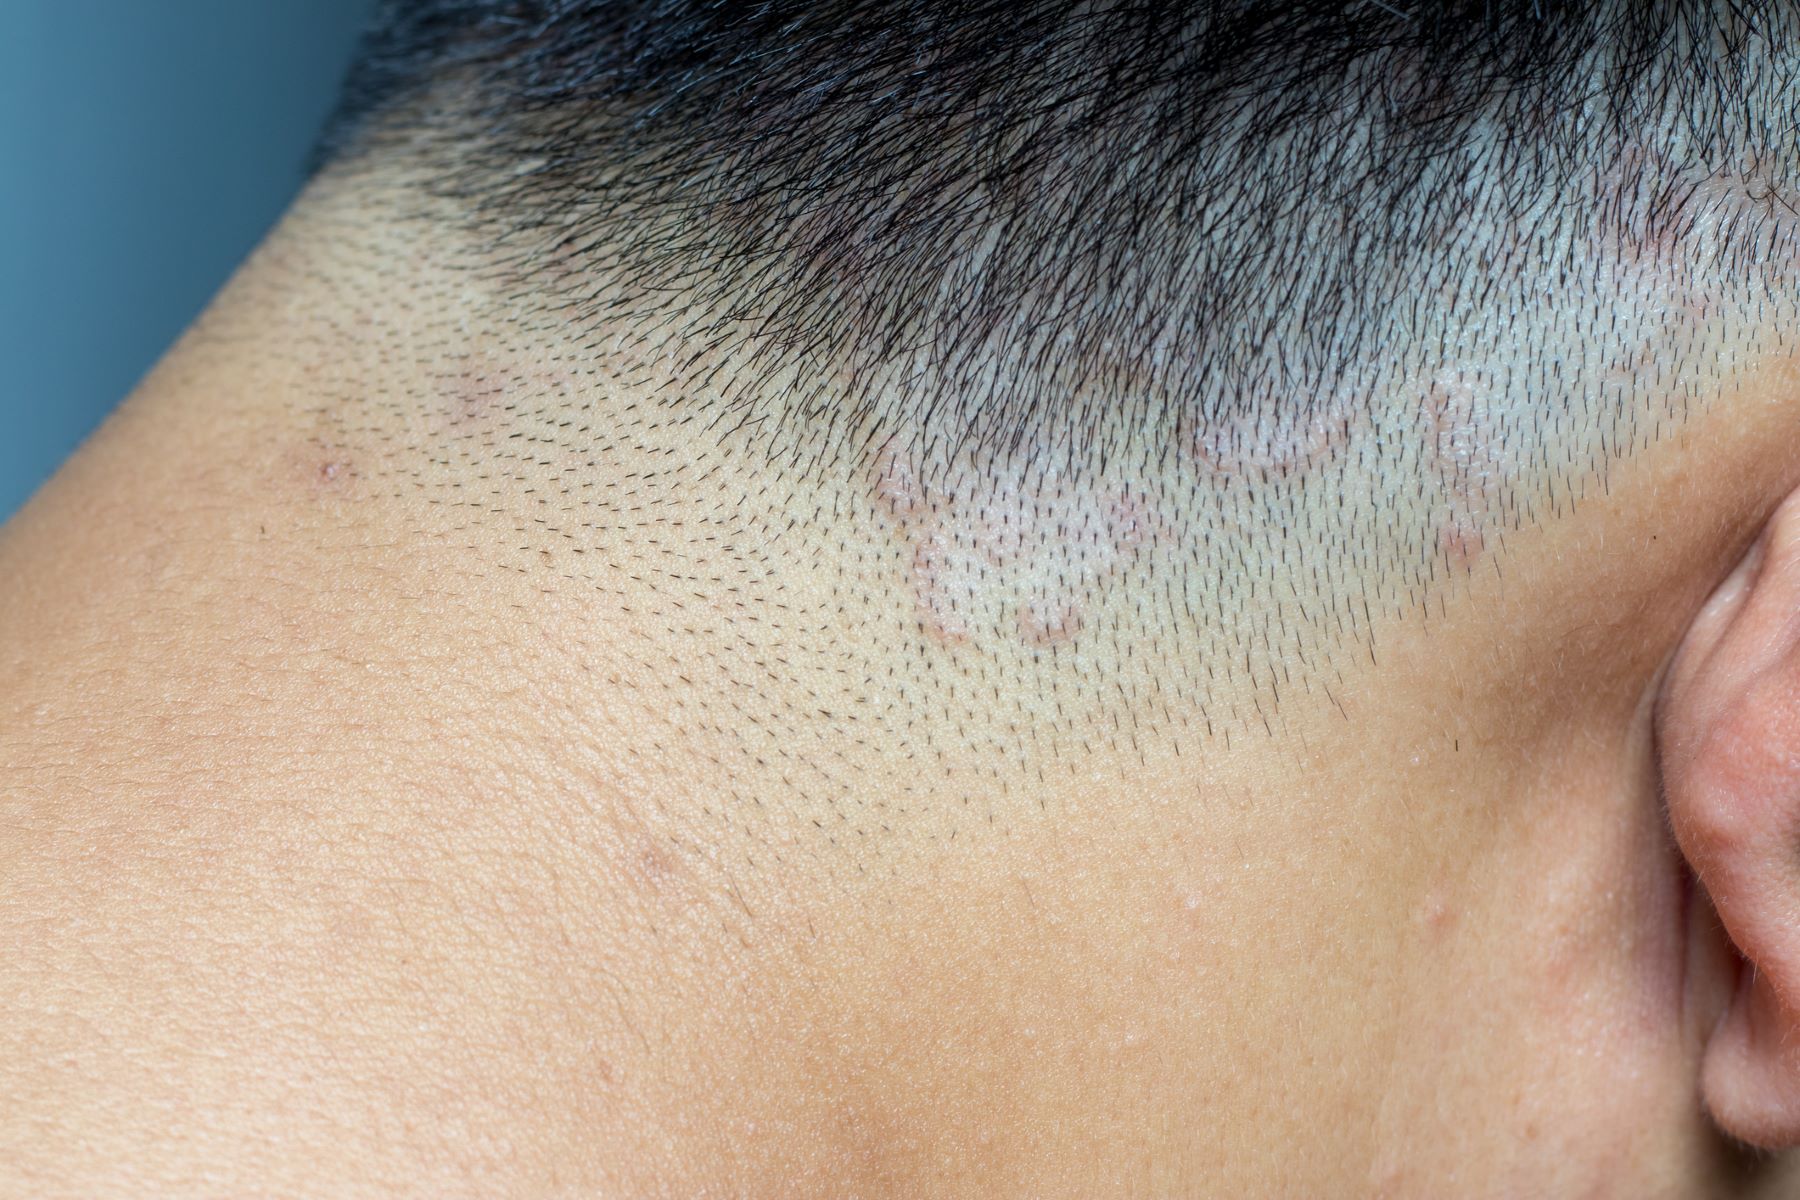 Male patient with tinea capitis (scalp ringworm)